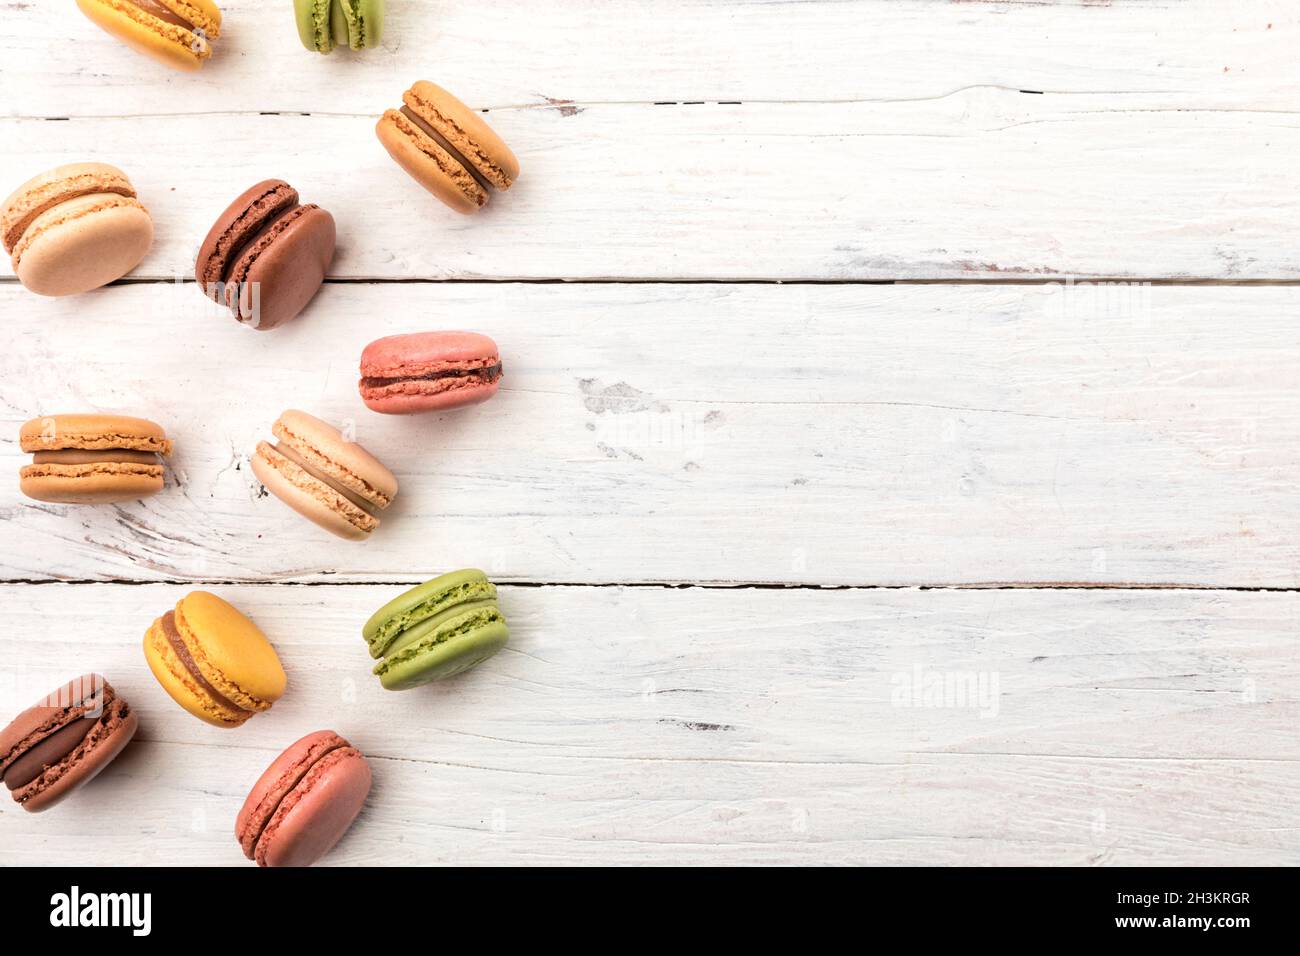 Rustic wooden background with a variety of colorful macarons pastry, French cookies high angle view with copy space Stock Photo